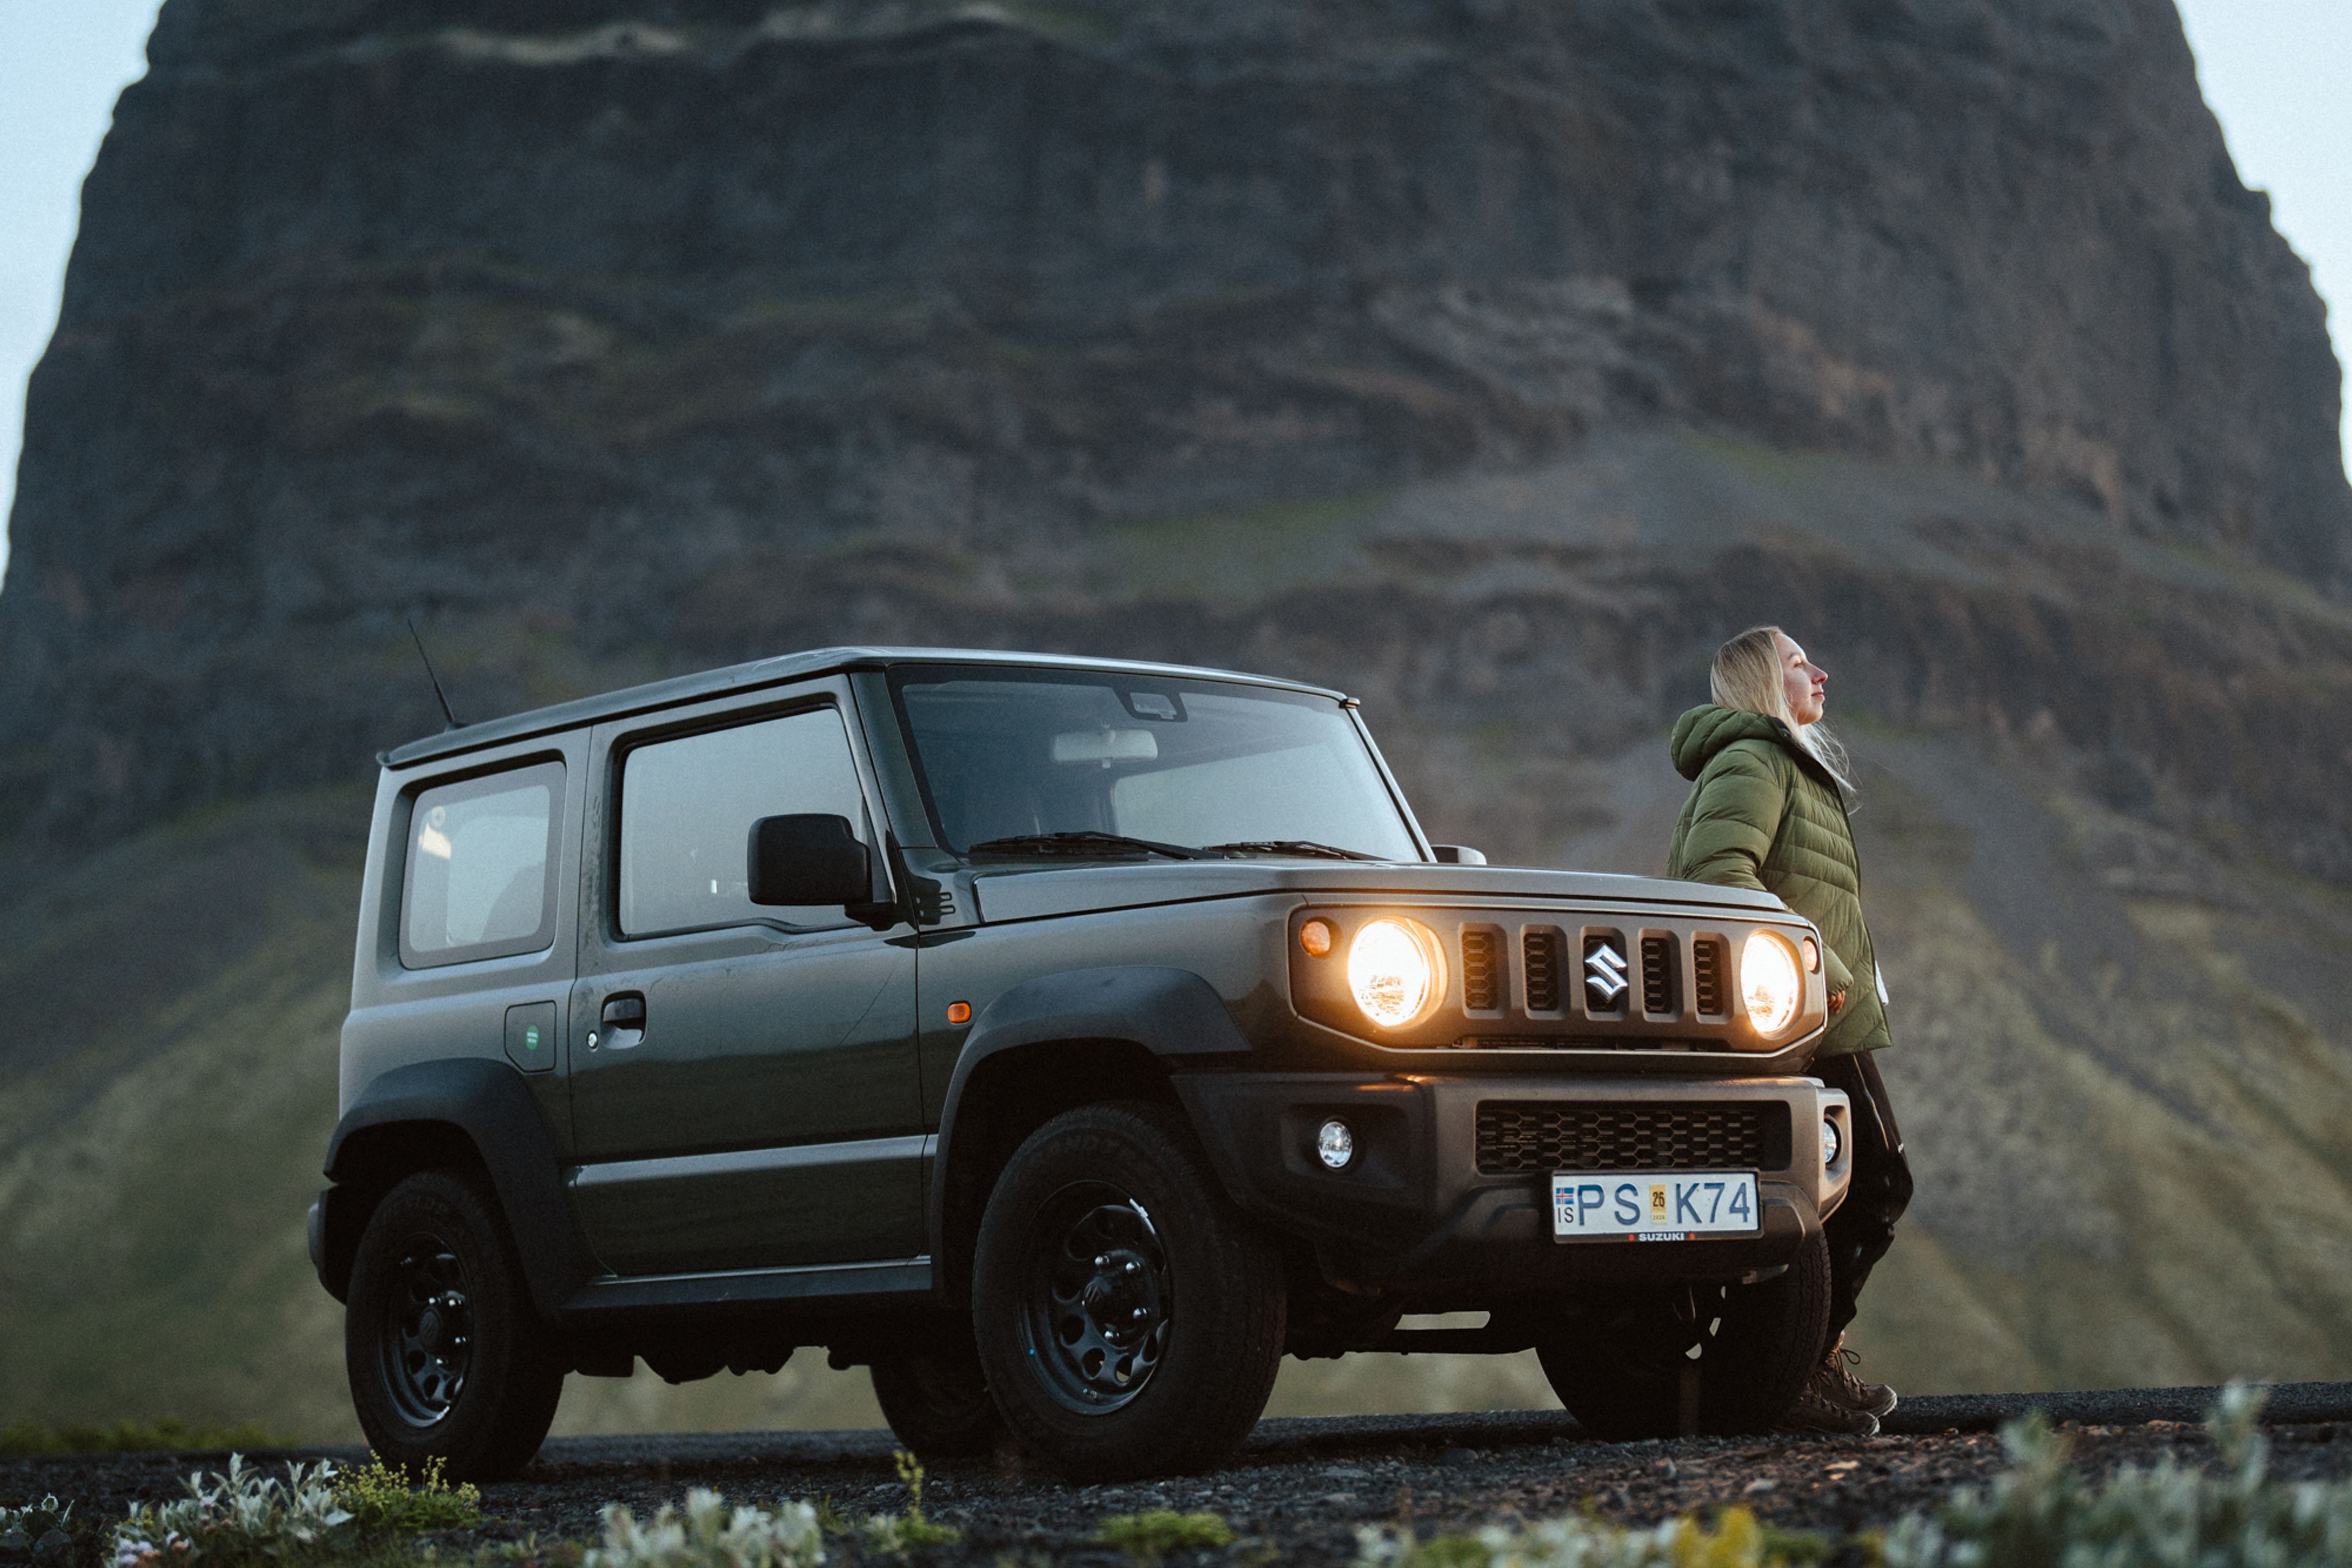 A woman Iceland in September, enjoying iceland nature her her 4x4 rental car